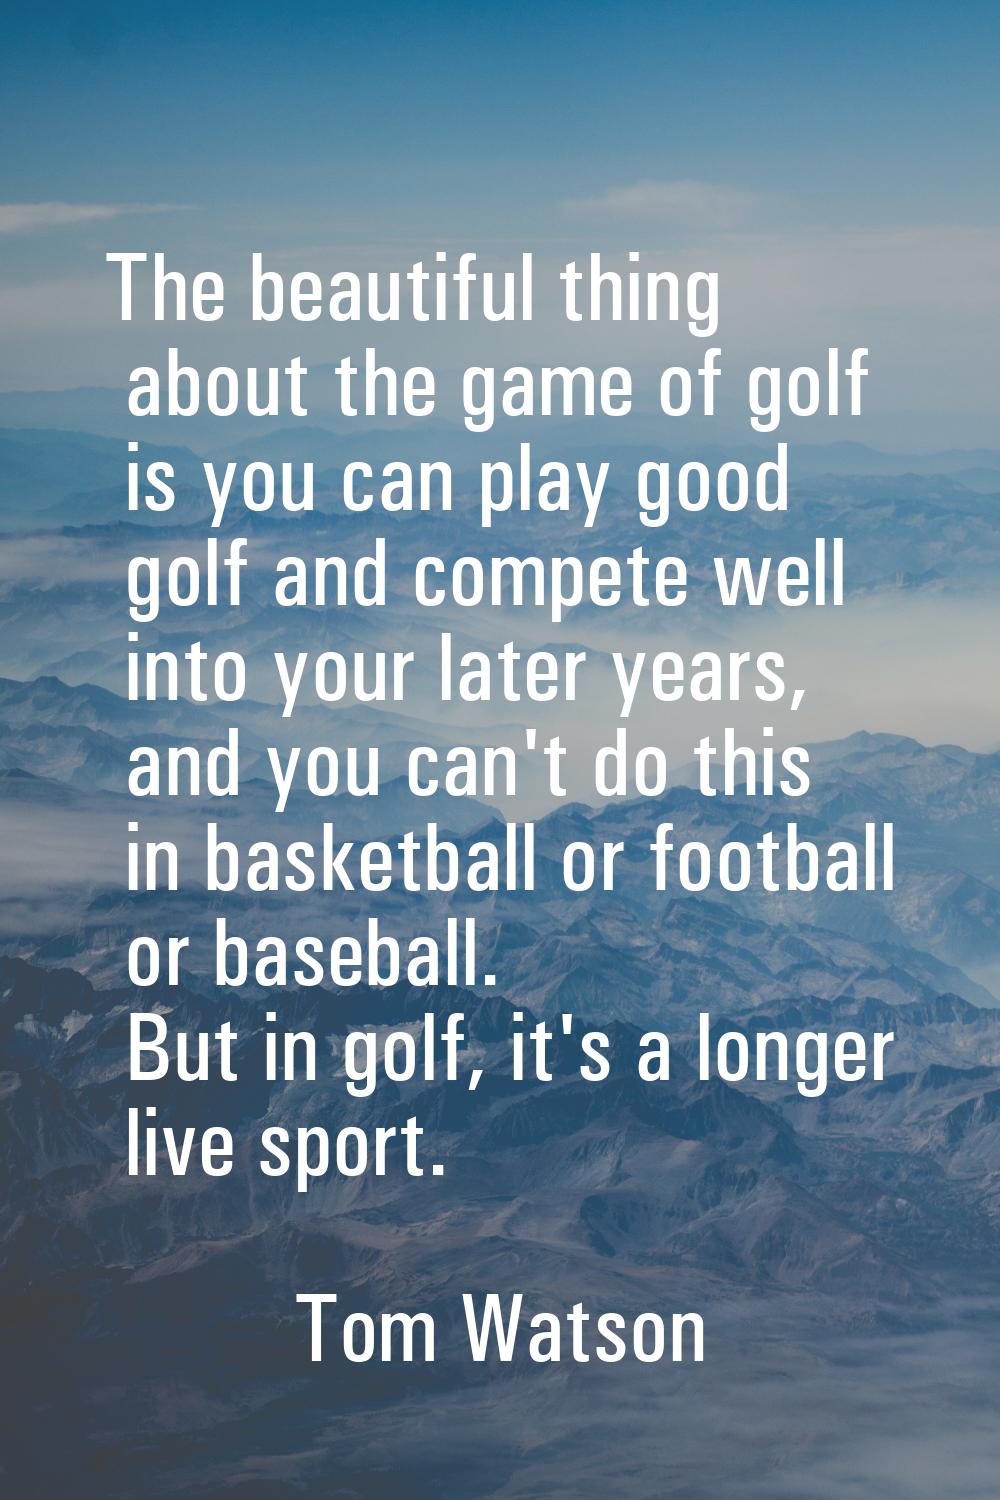 The beautiful thing about the game of golf is you can play good golf and compete well into your lat